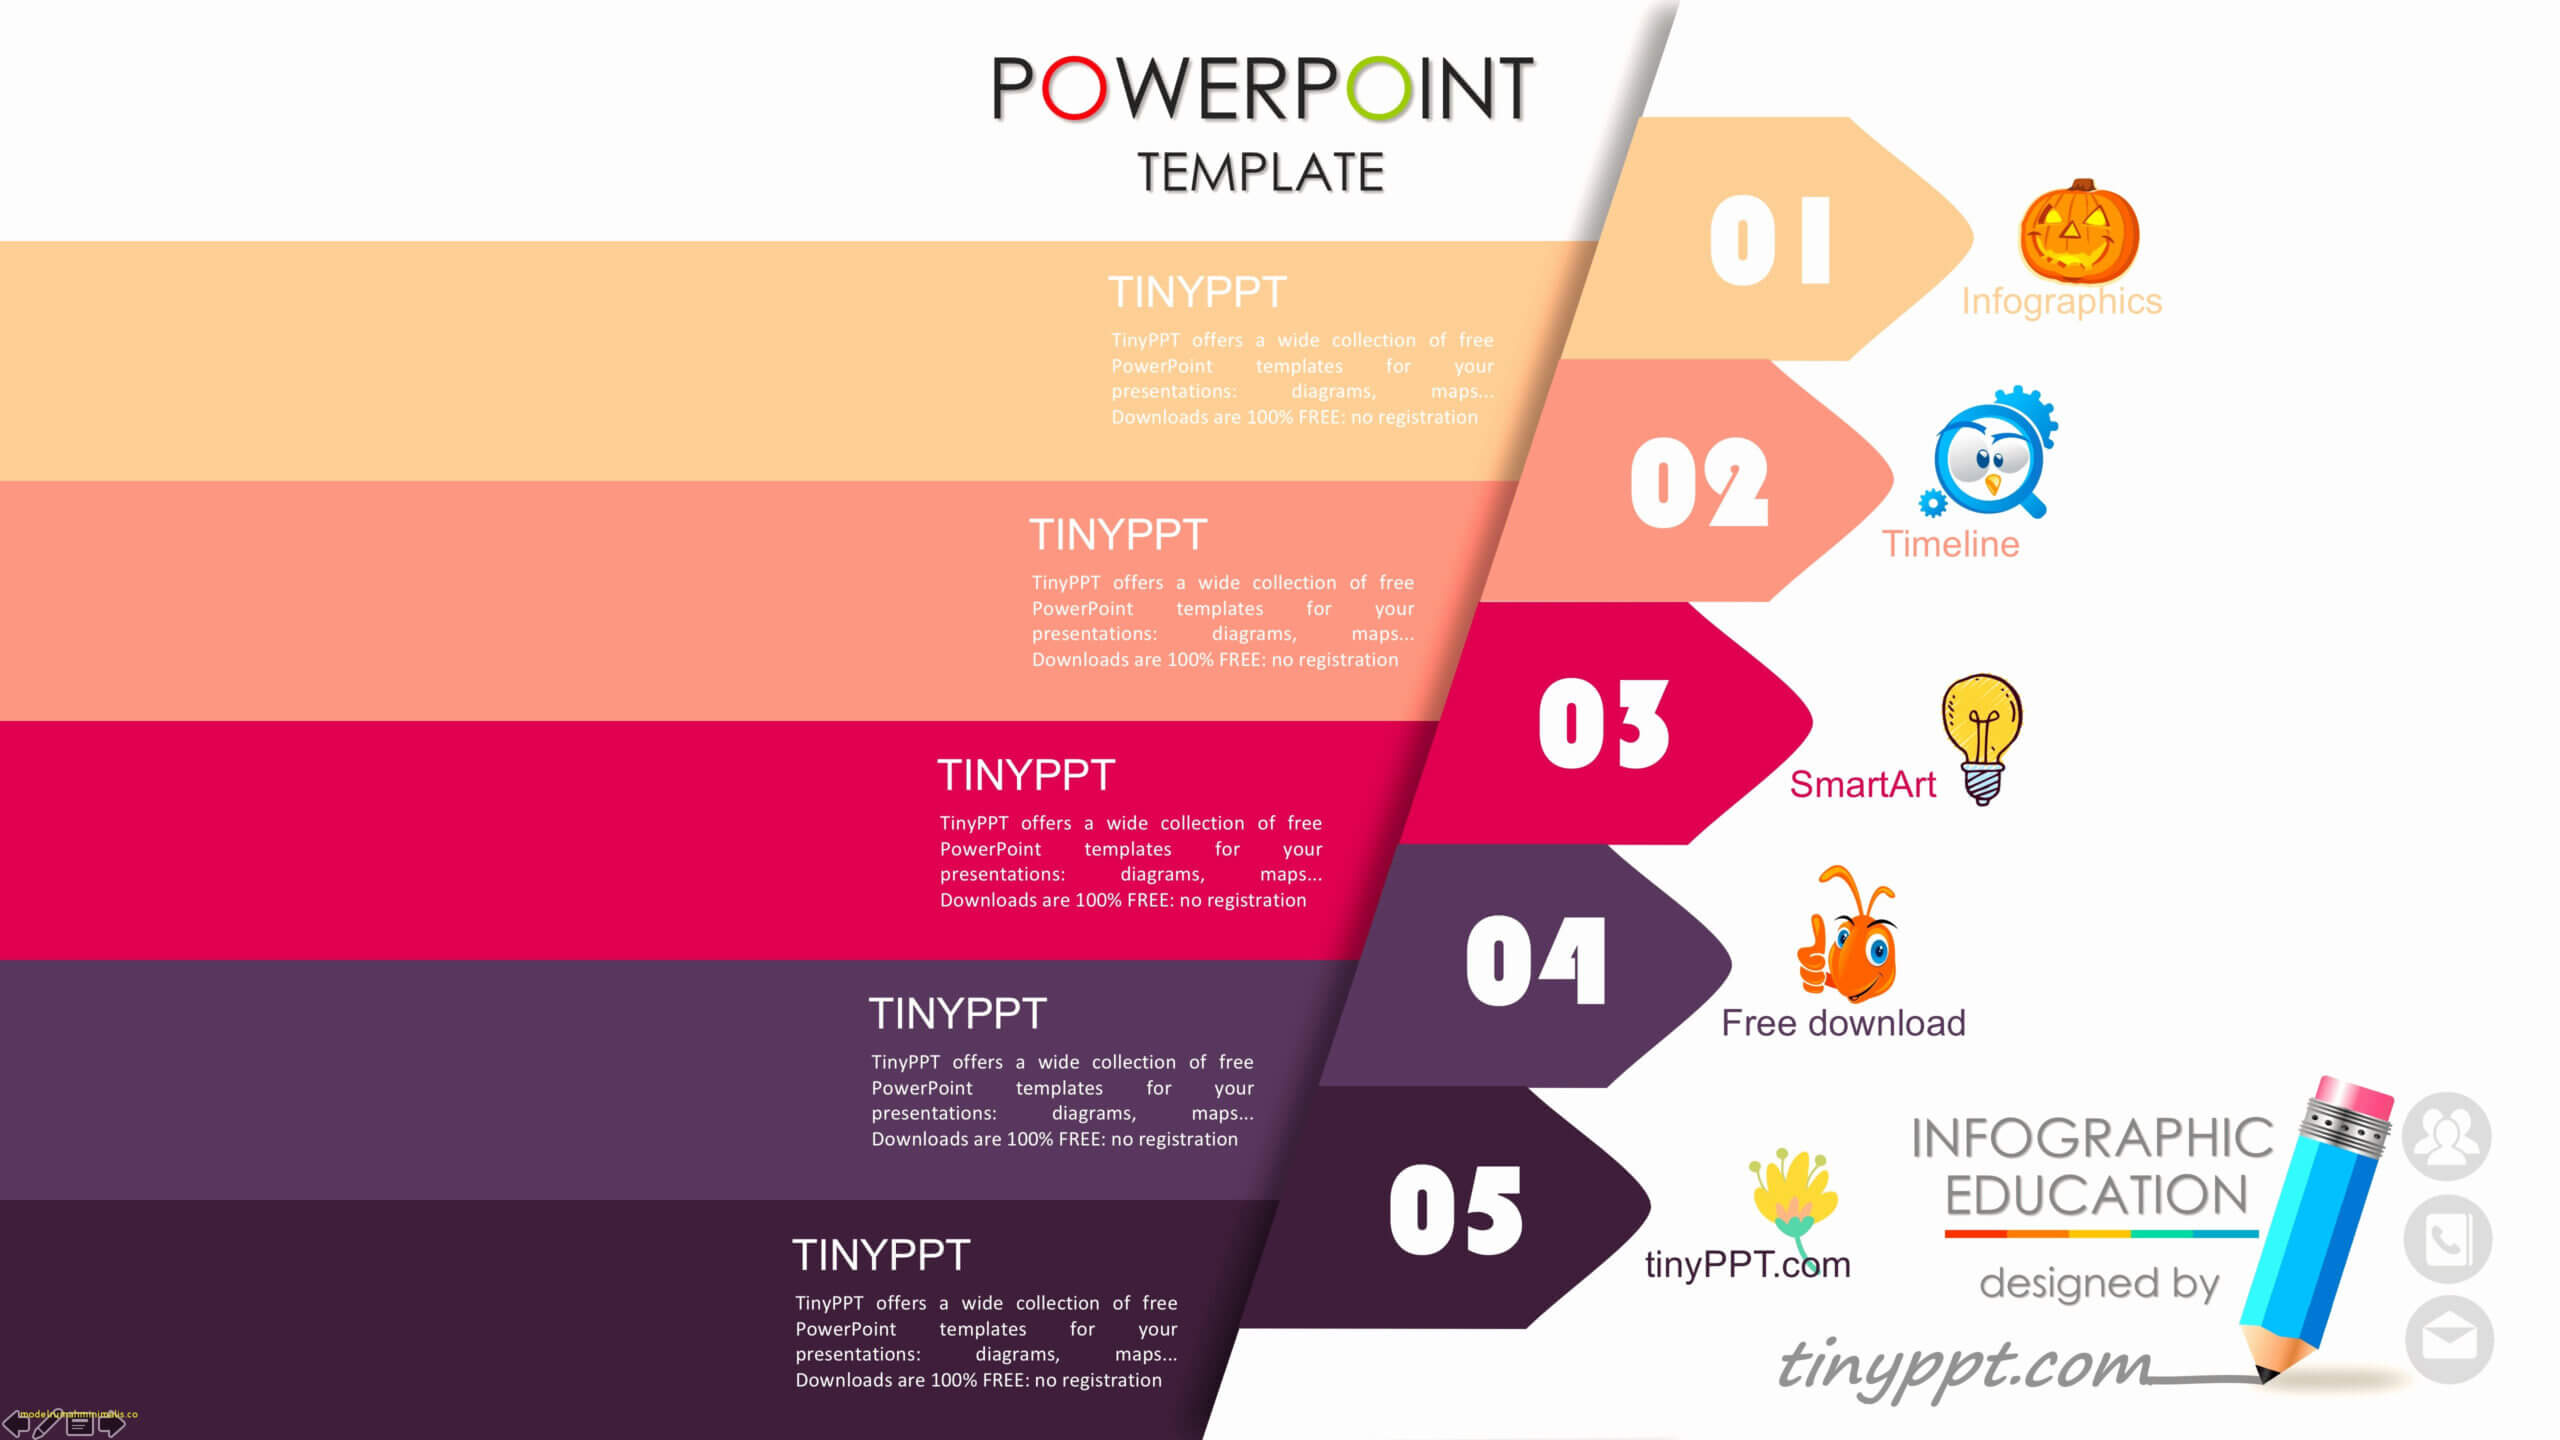 Fantastic Animated Powerpoint Templates Free Download 2007 Intended For Powerpoint 2007 Template Free Download